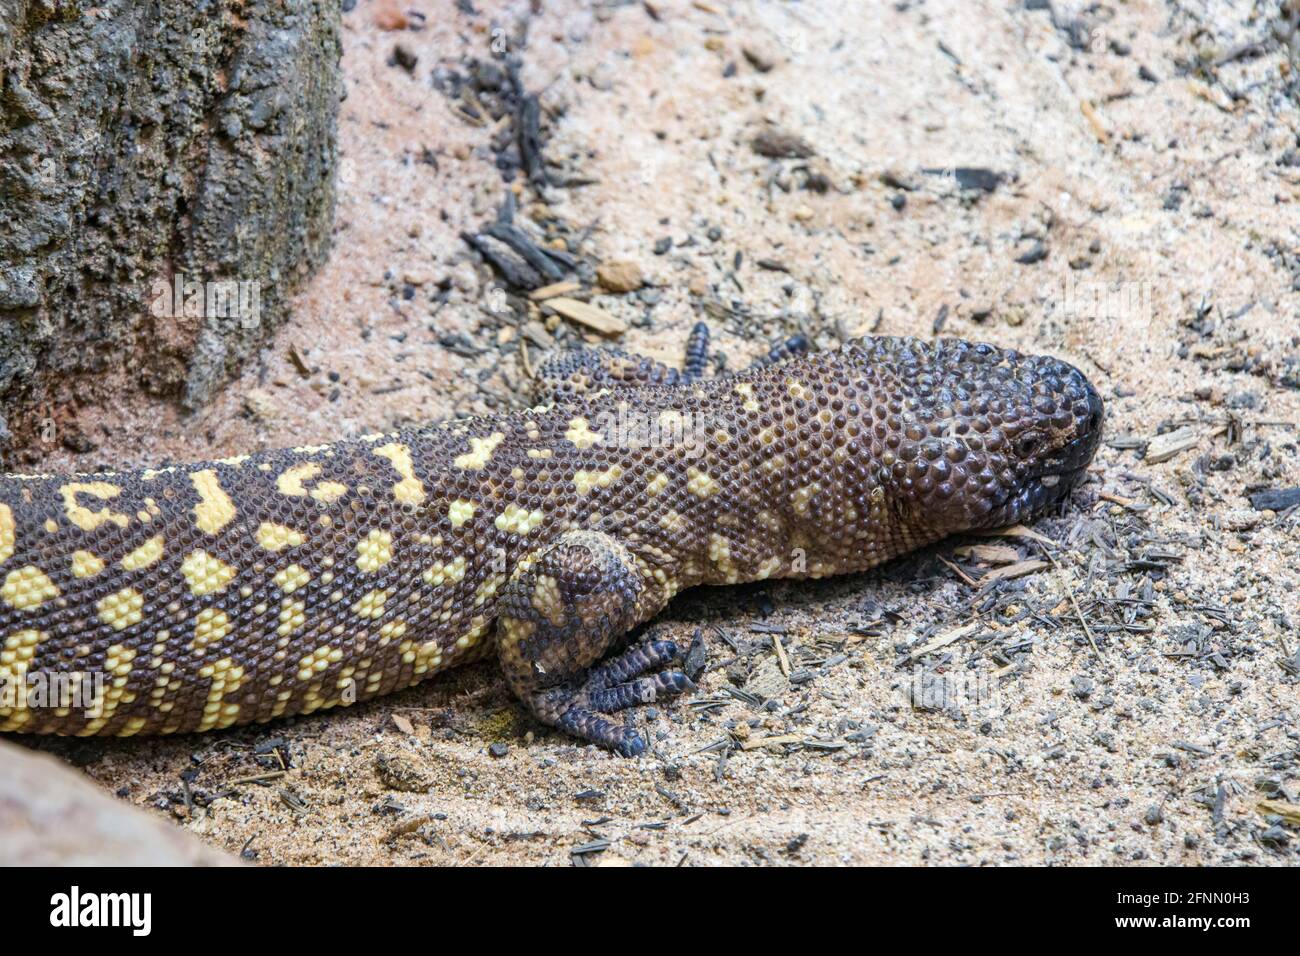 The Mexican beaded lizard (Heloderma horridum) is a species of lizard in the family Helodermatidae, one of the two species of venomous beaded lizards Stock Photo